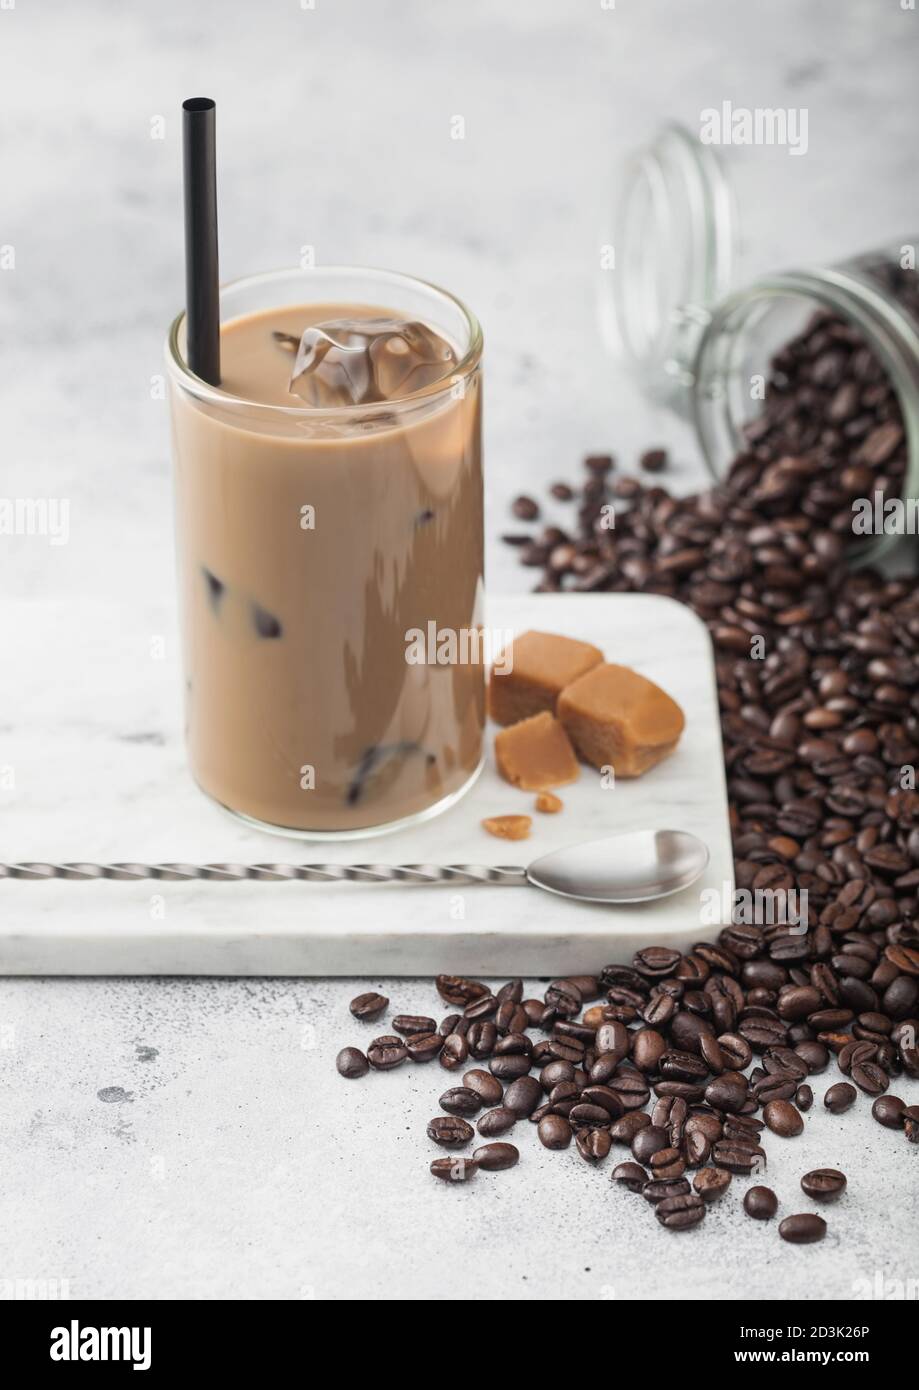 A Glass Jar Of Iced Coffee On The Table Stock Photo, Picture and